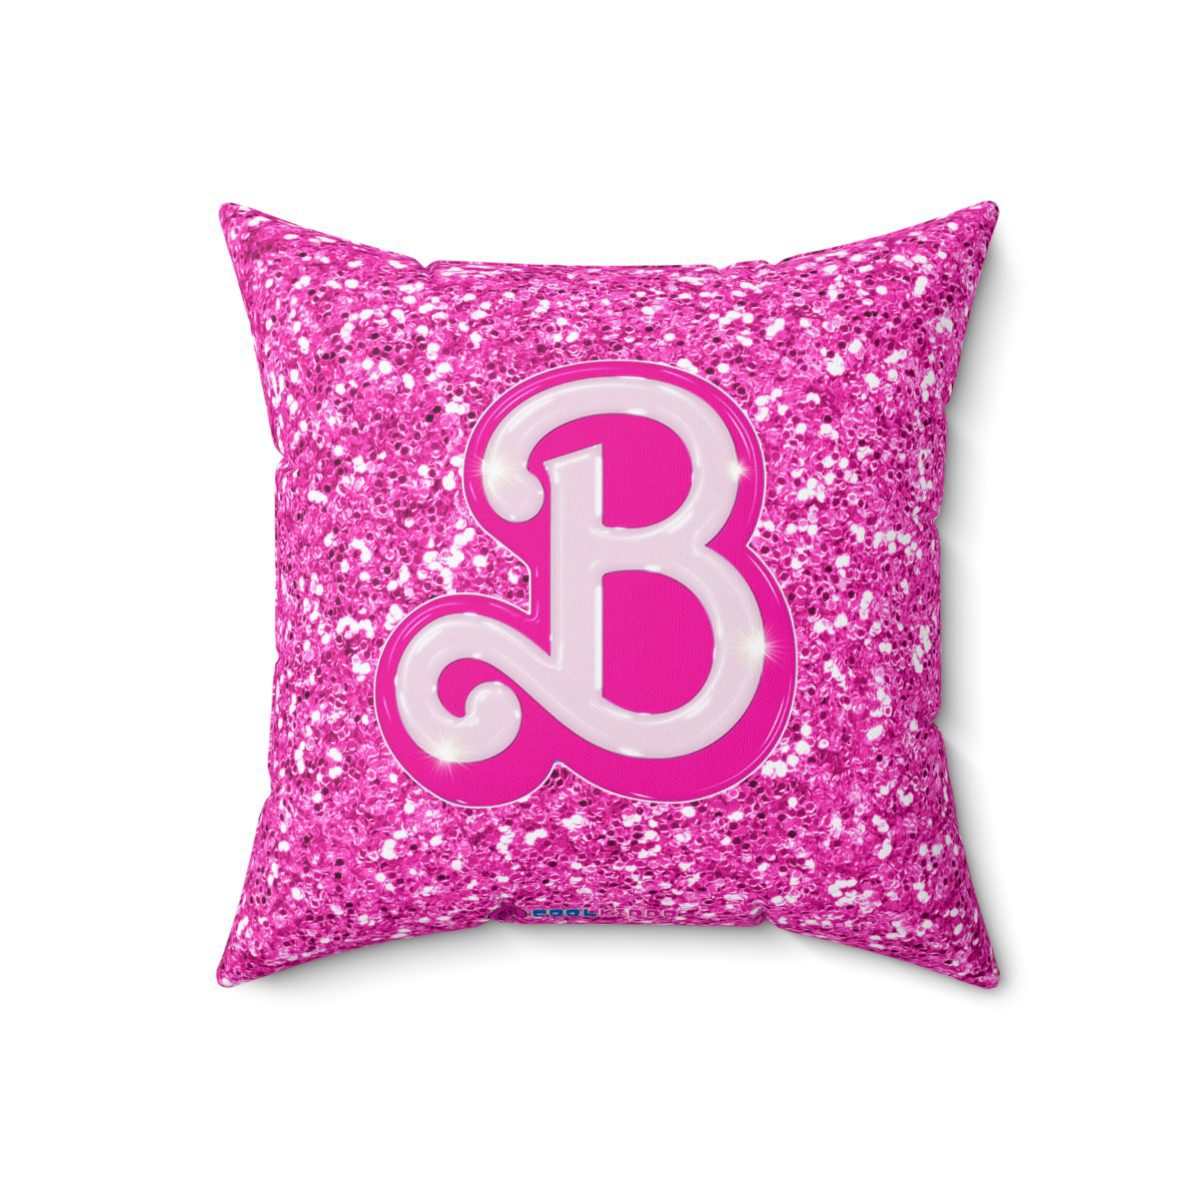 Barbie Glitter Simulation Pink Cushion: Double-Sided Sparkle for Stylish Comfort Cool Kiddo 10